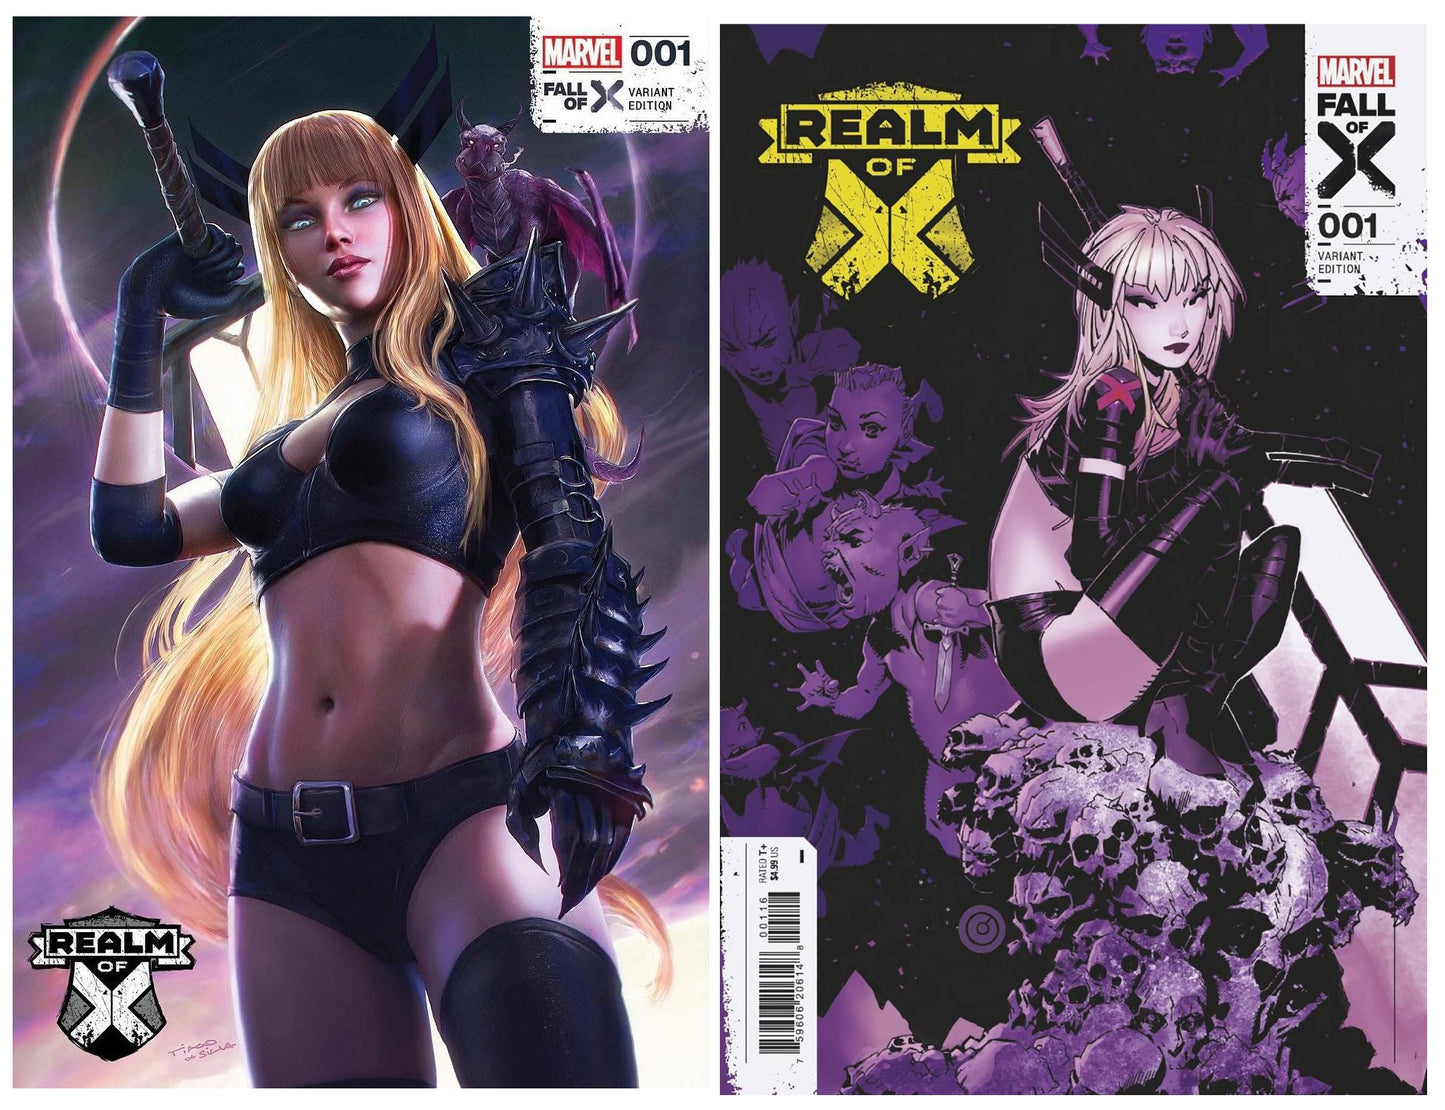 REALM OF X #1 TIAGO DA SILVA VARIANT LIMITED TO 500 COPIES WITH NUMBERED COA + 1:25 VARIANT